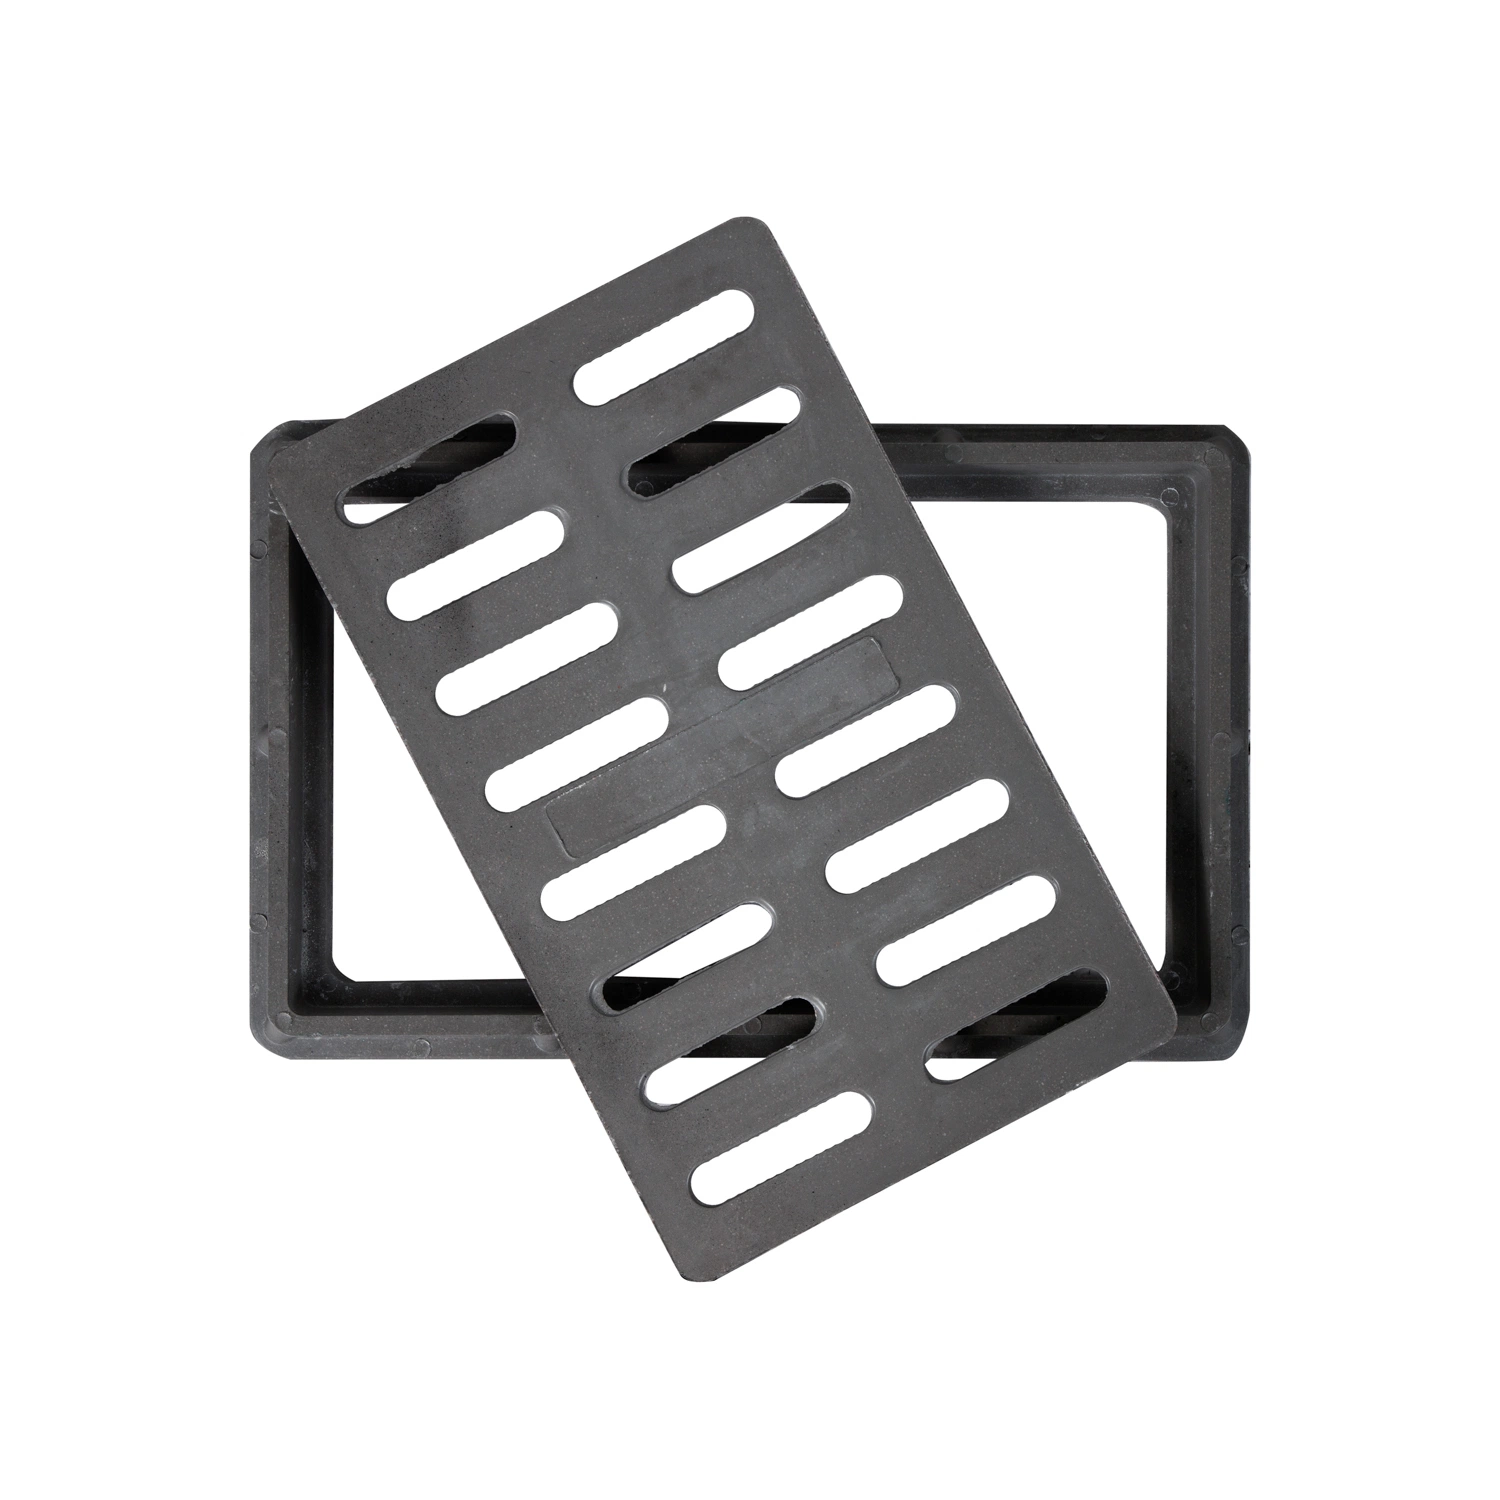 Composite Drain Grates High Quality Gully Grating Trench Drain Cover Drainage Ditch Cover